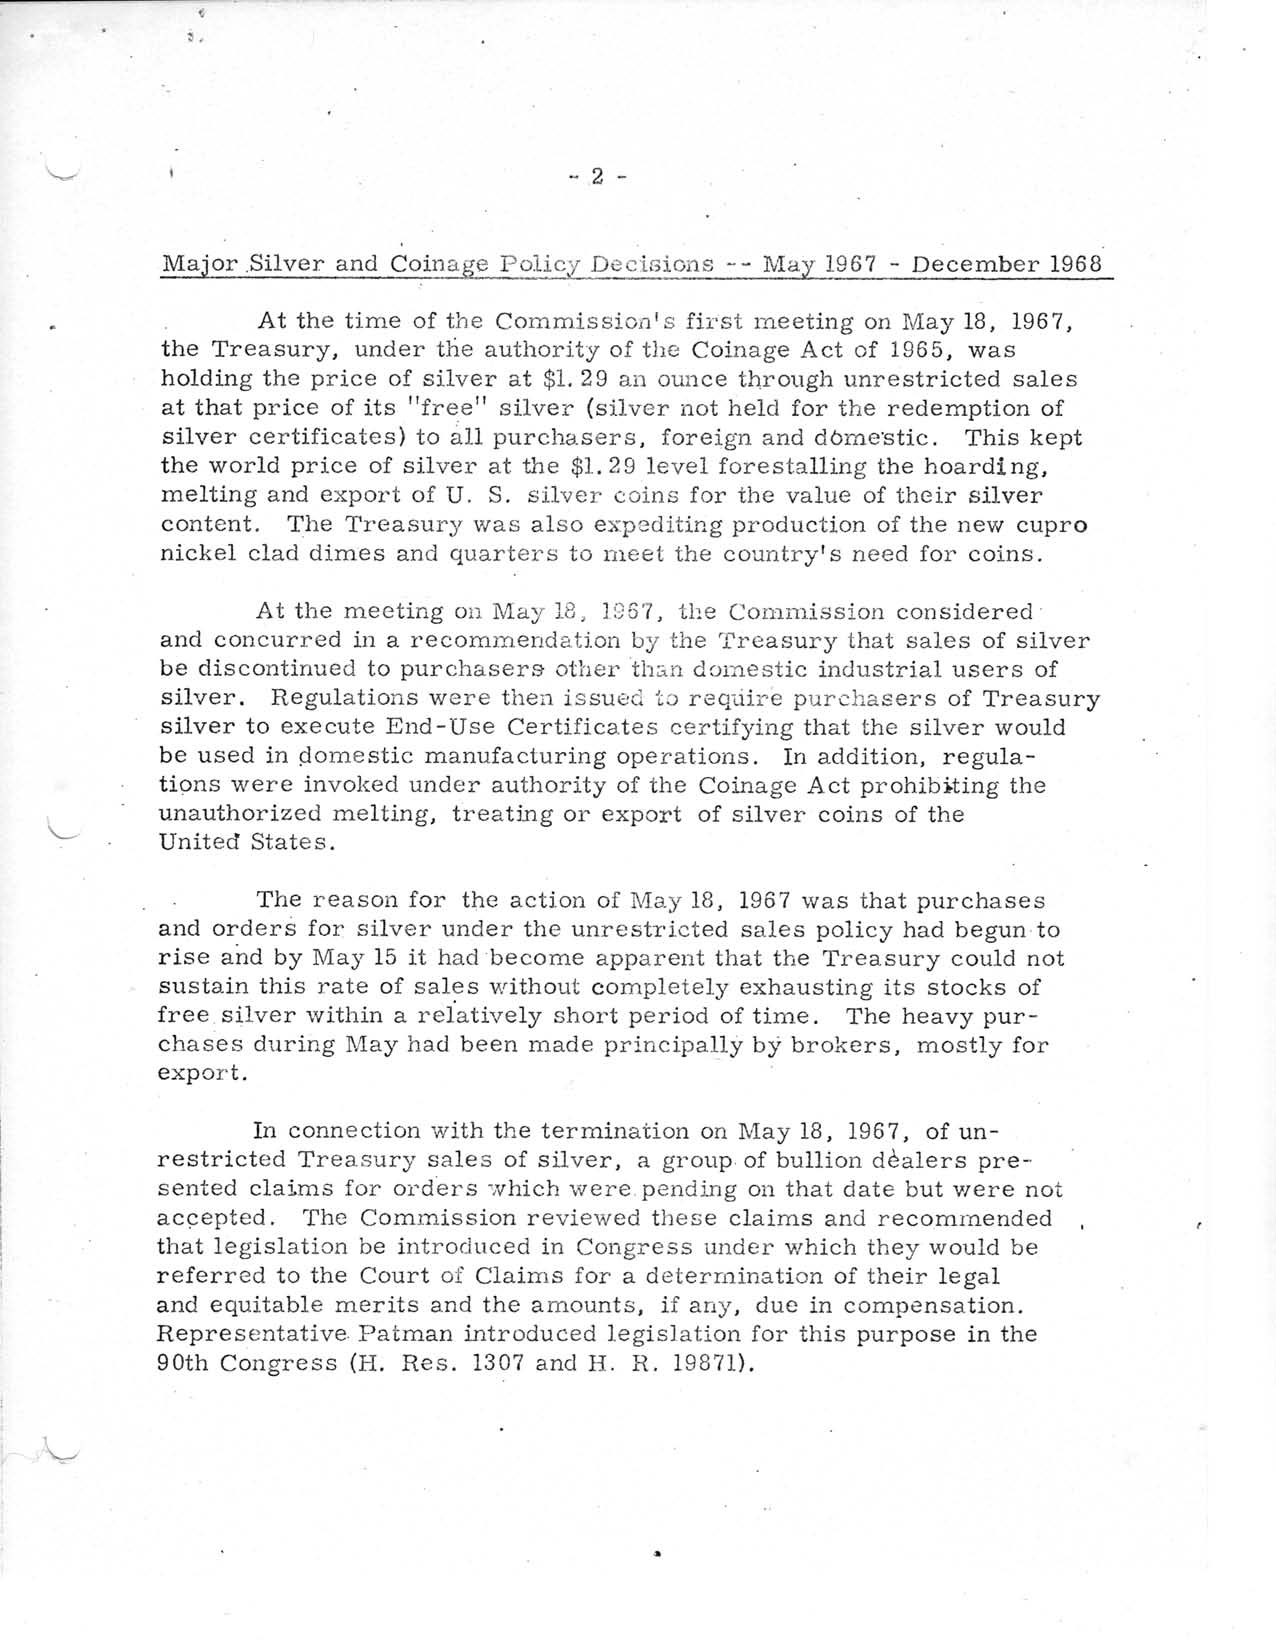 Historic Press Release: Letter to President From Treasury Secretary, Page 3